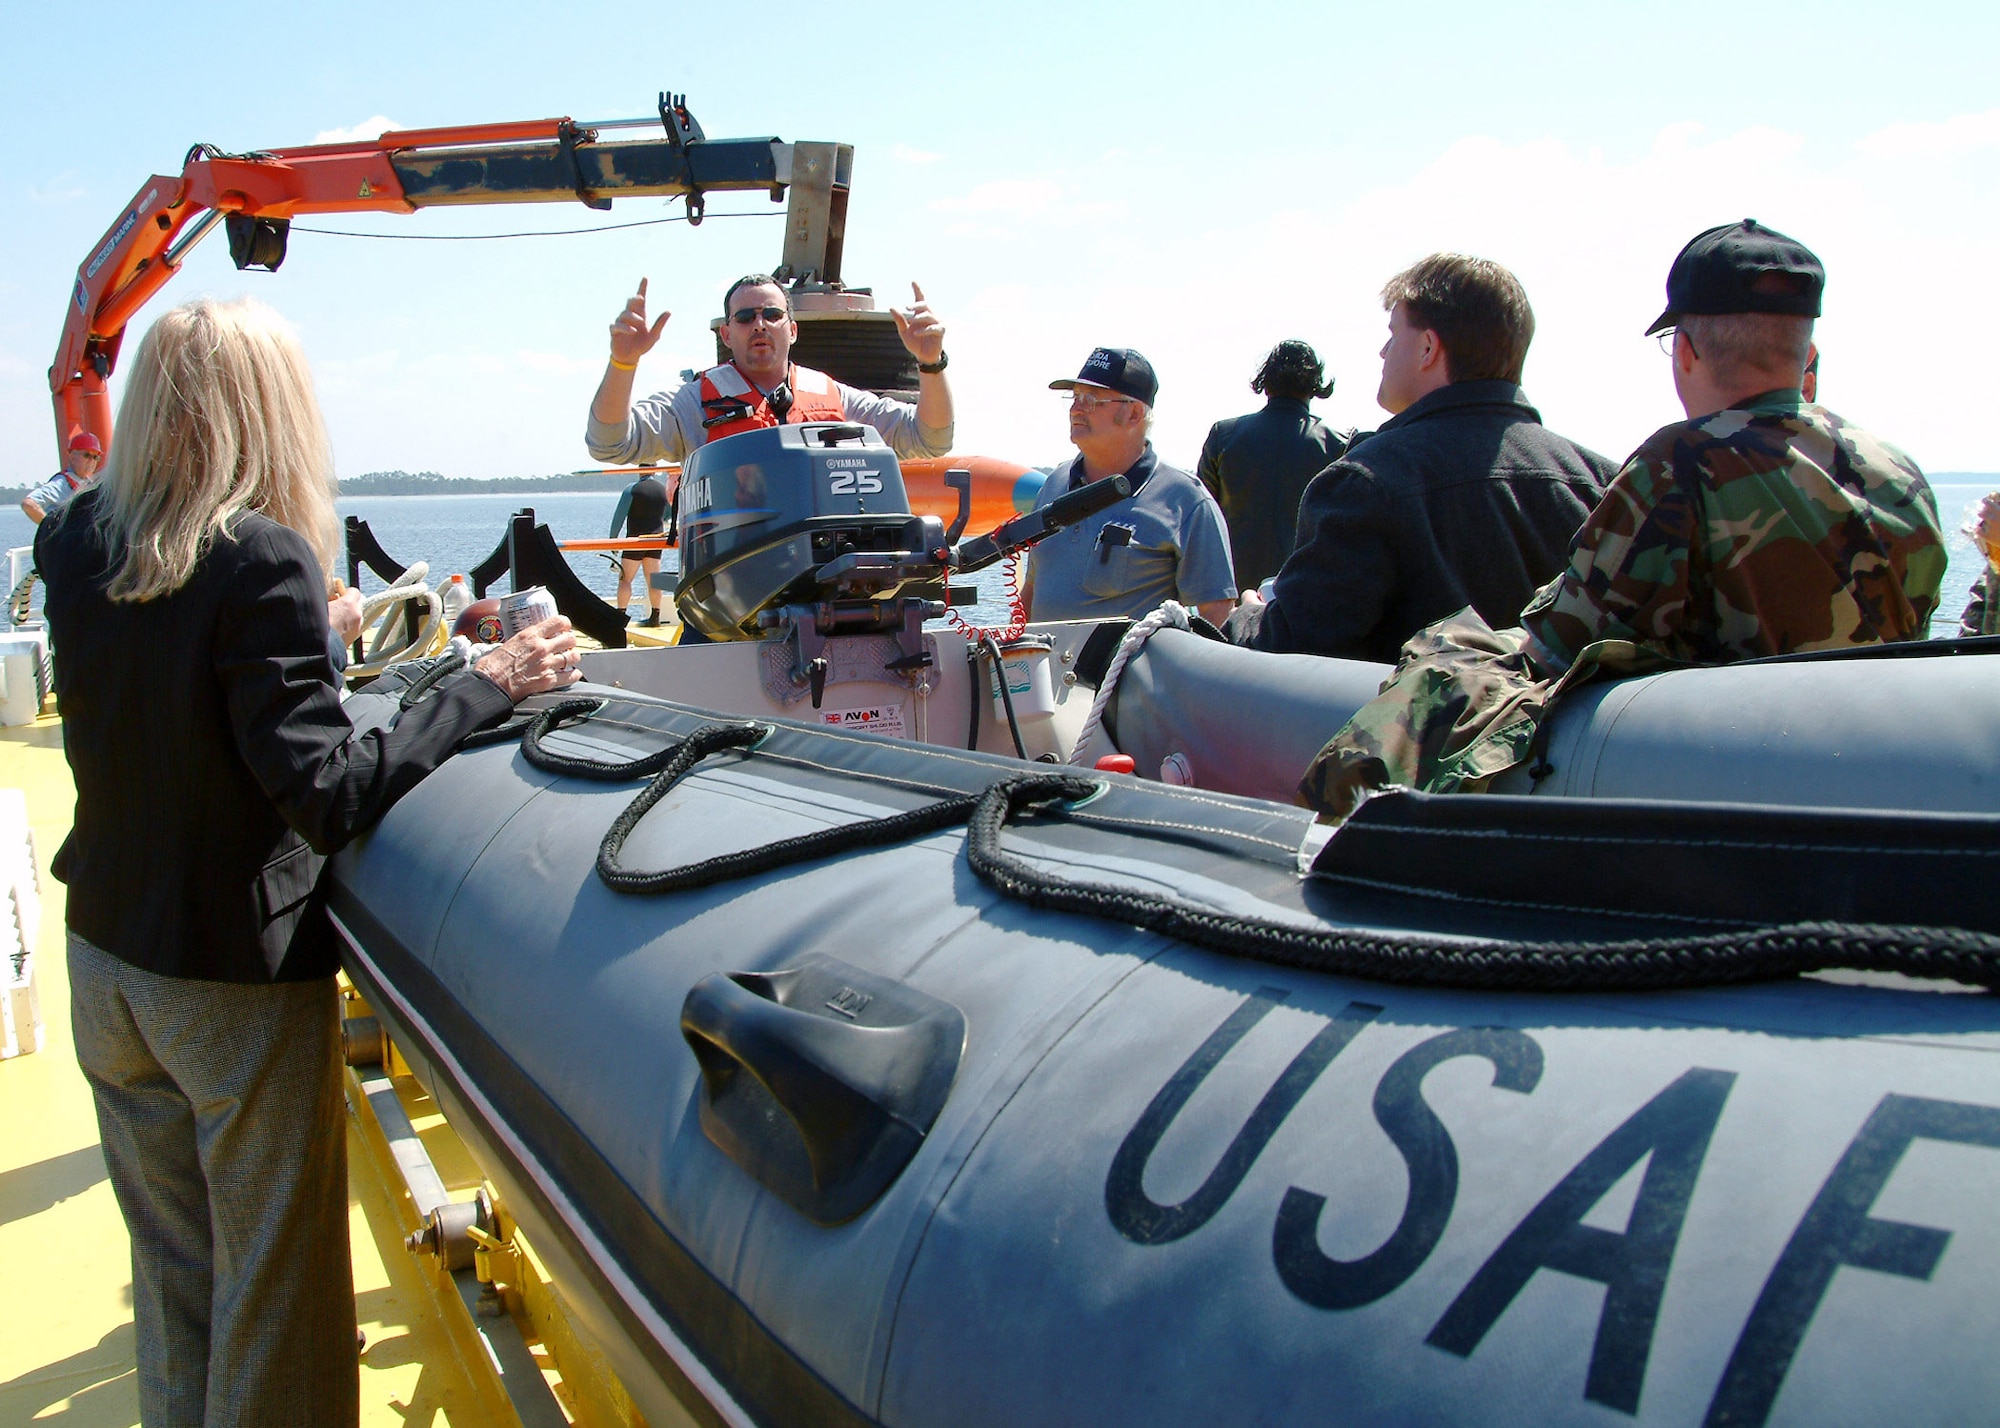 John Wise briefs a tour group on sub-scale drone recovery before his team performs a demonstration March 26 in the waters off of Tyndall Air Force Base, Fla. The ship used for recovery is one of only three 120-foot boats owned by the Air Force. They are contracted through the 82nd Aerial Targets Squadron to help recover sub-scale drones after they are shot down during live fire exercises. (U.S. Air Force photo/Staff Sgt. Samuel King Jr.) 